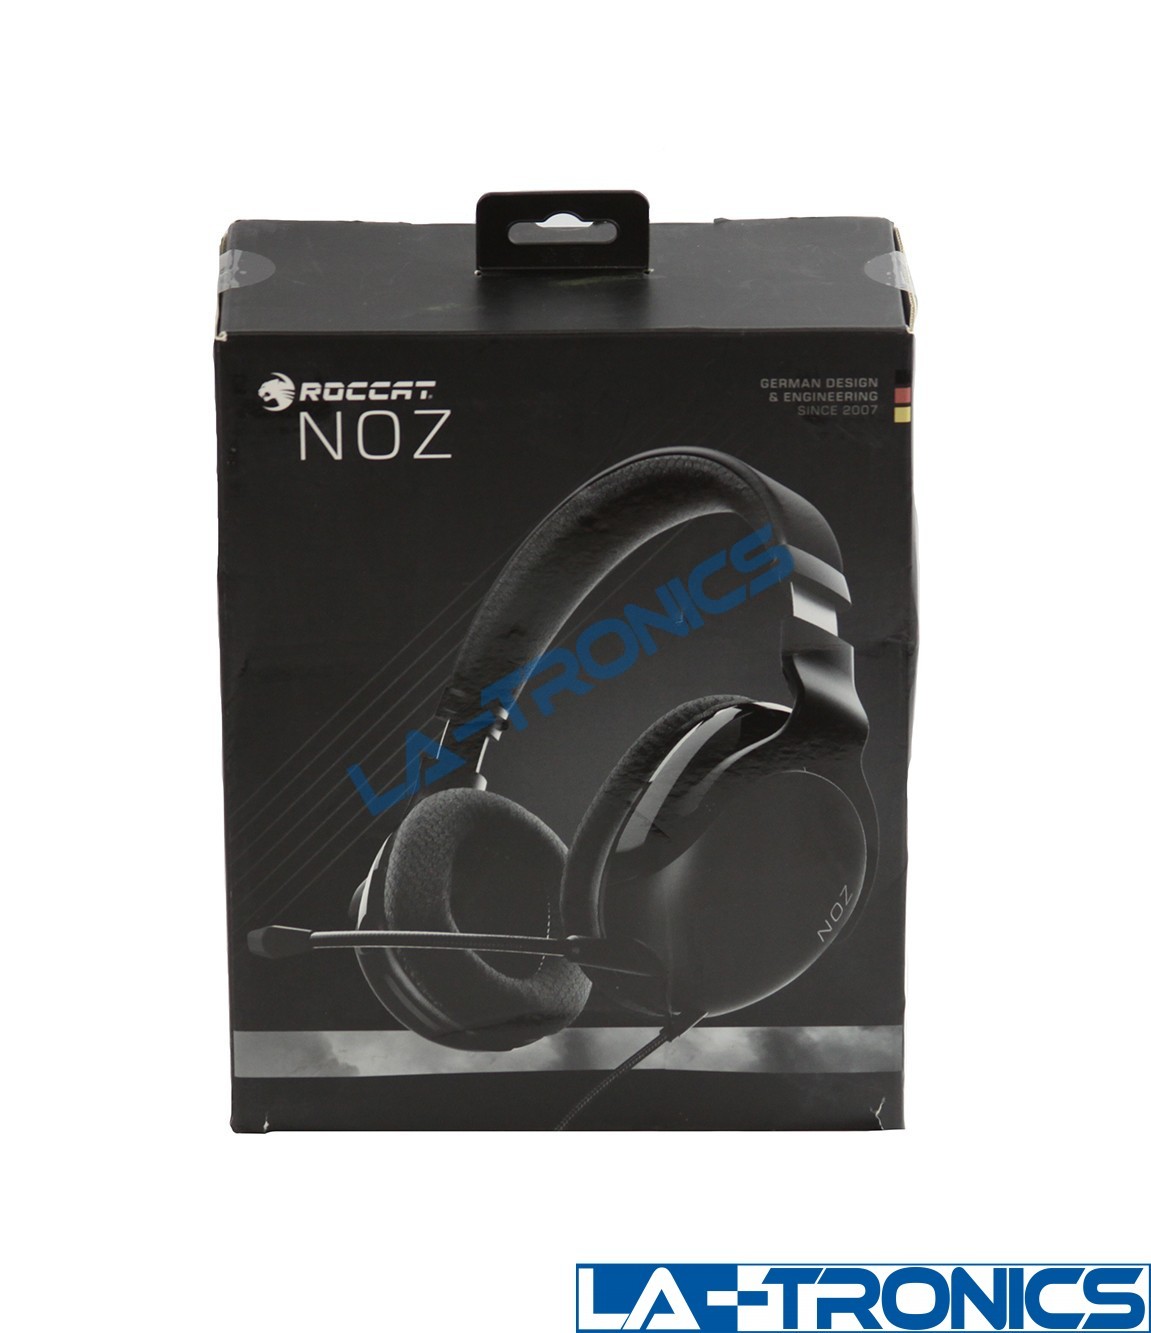 NEW ROCCAT NOZ ROC-14-520-AS Stereo Gaming Headset - Black